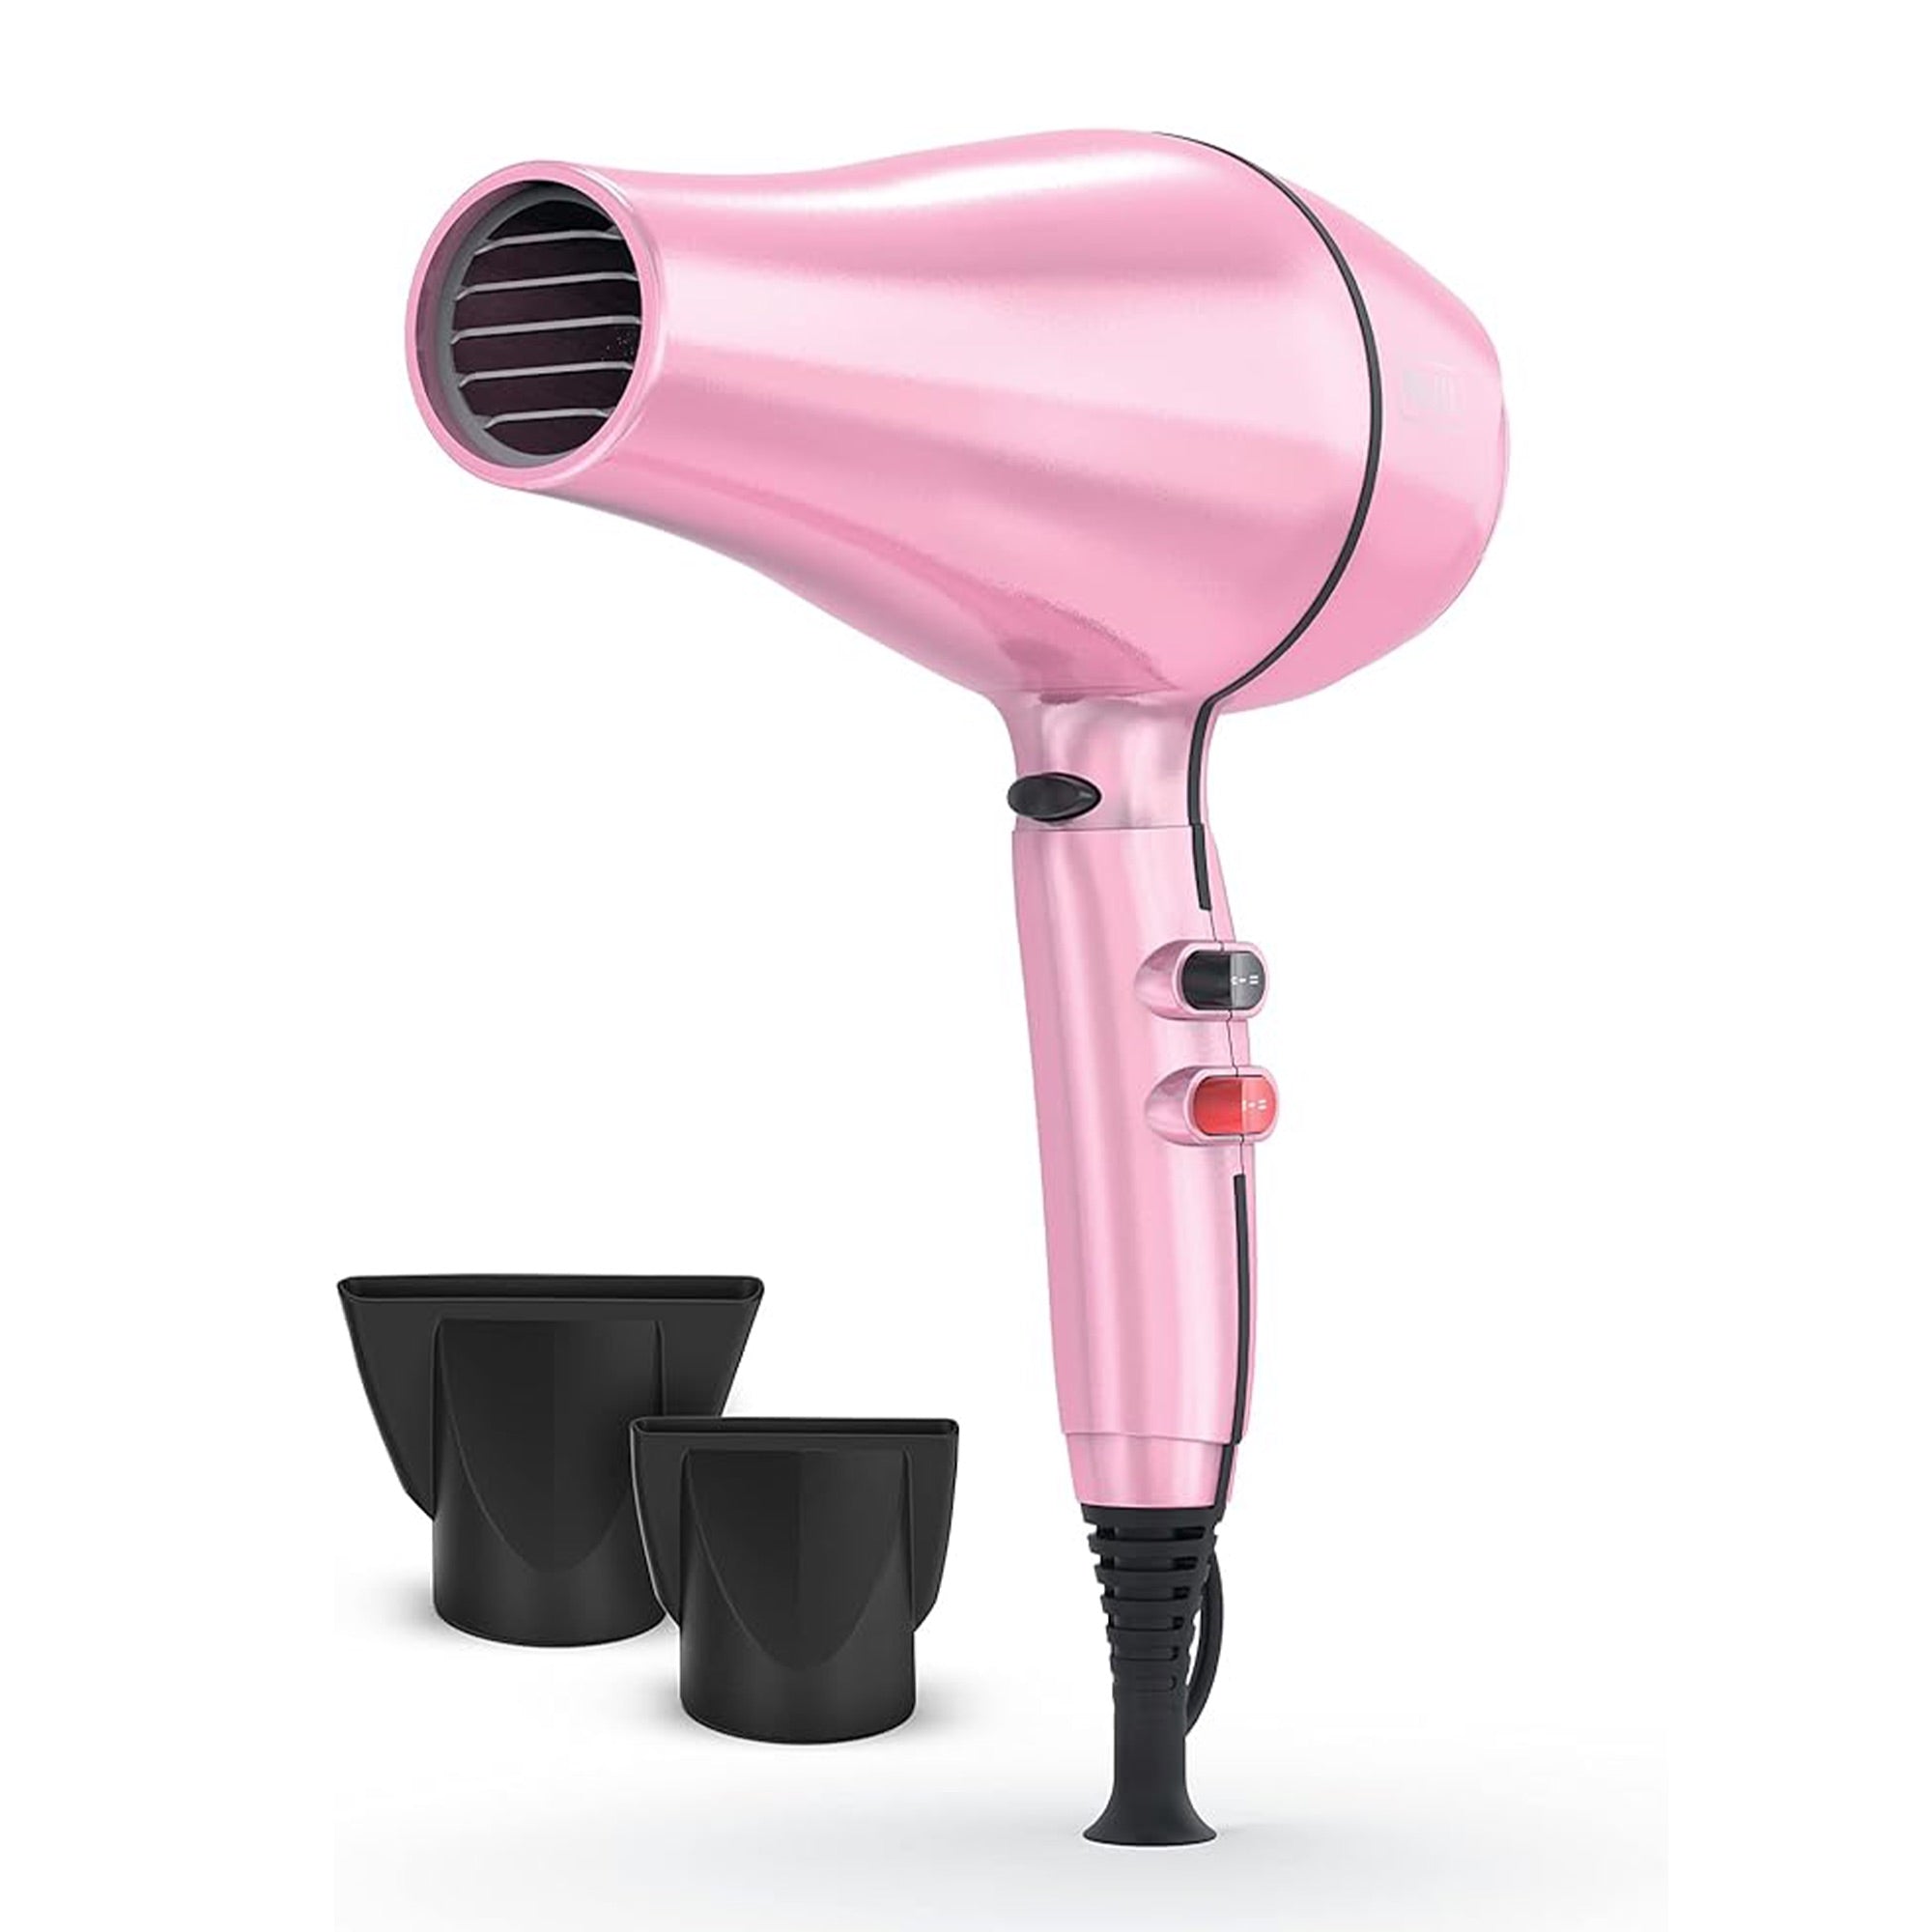 Wahl - Pro Keratin Dryer Pink Shimmer Special Edition 2200W